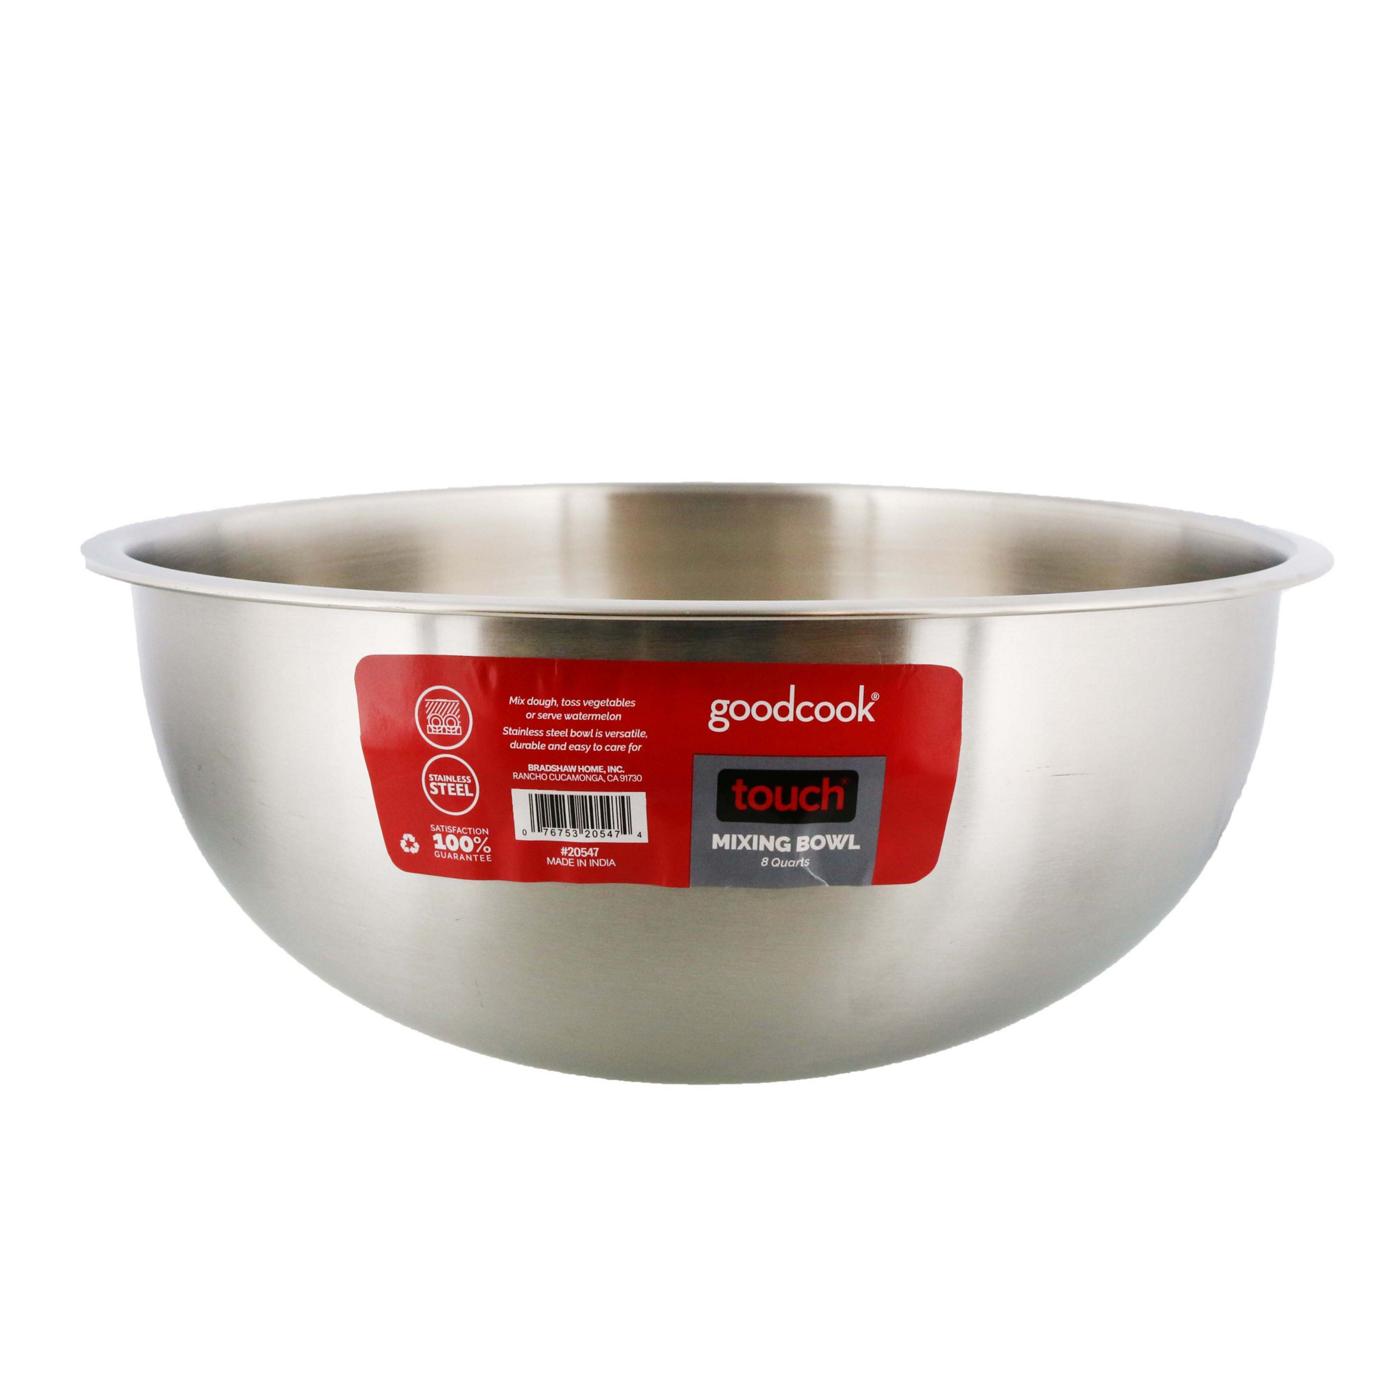 GoodCook Touch Stainless Steel Mixing Bowl; image 1 of 3